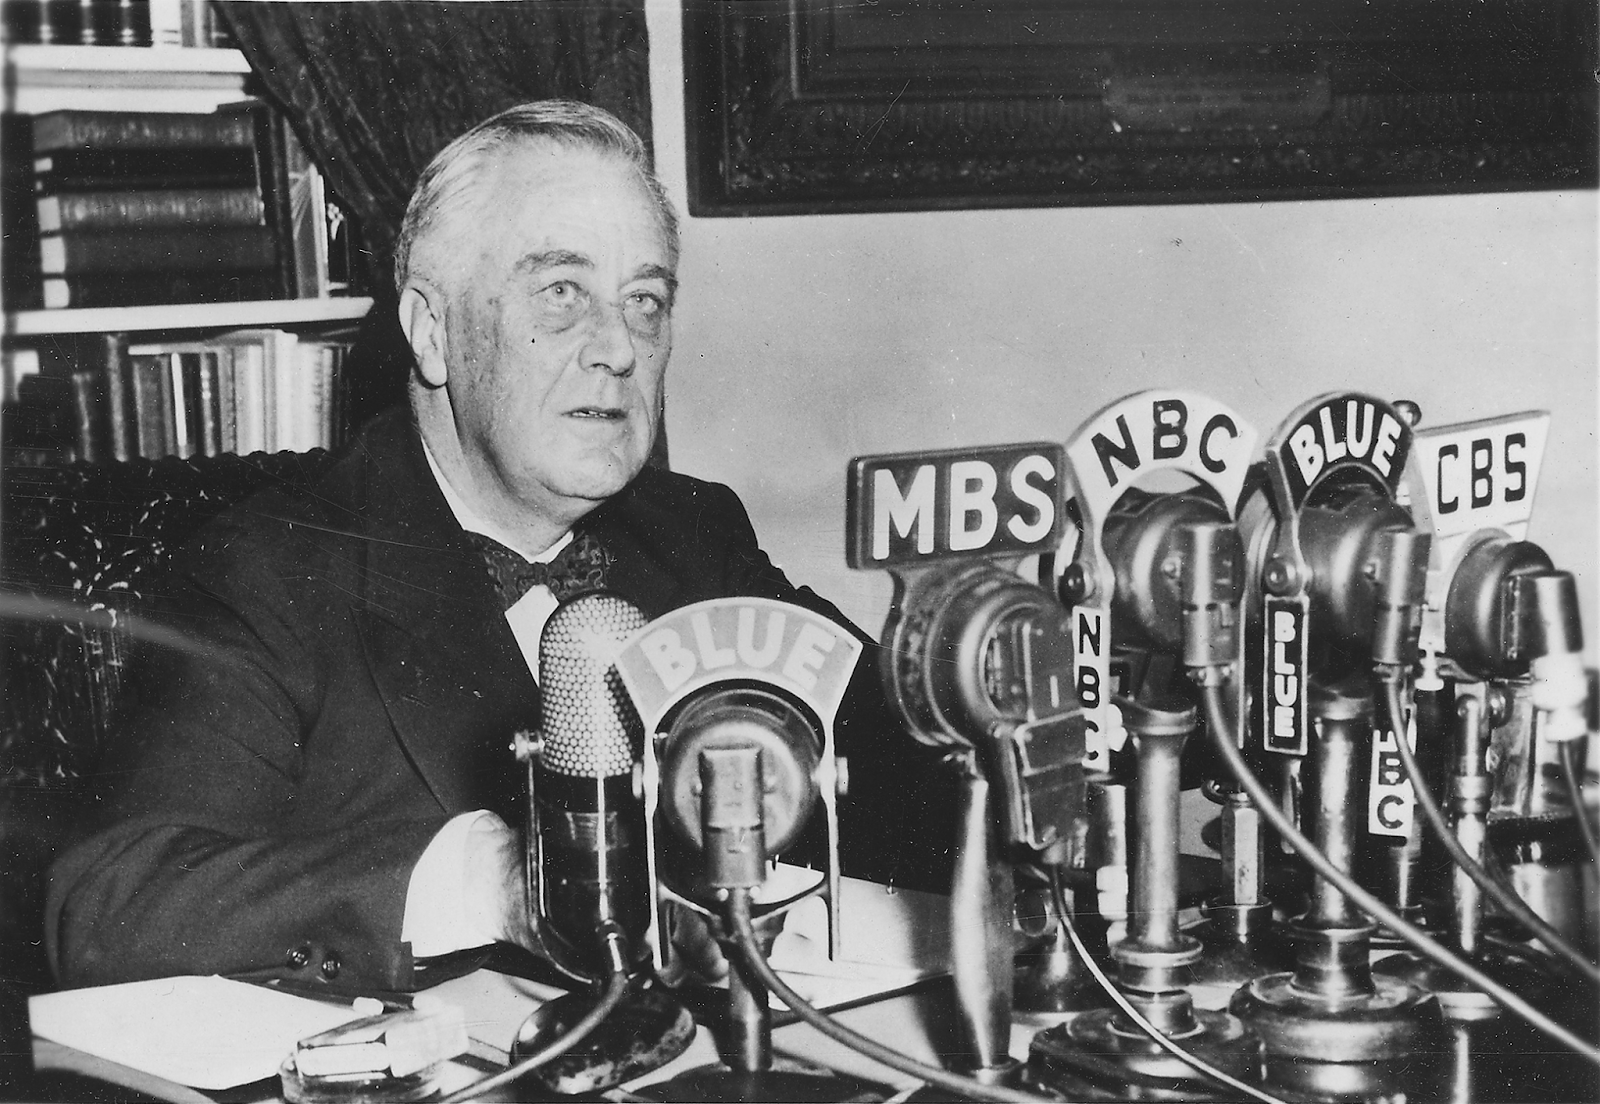 FDR proposing the EBR, which was regarded as a "Socialist" idea by other politicians.